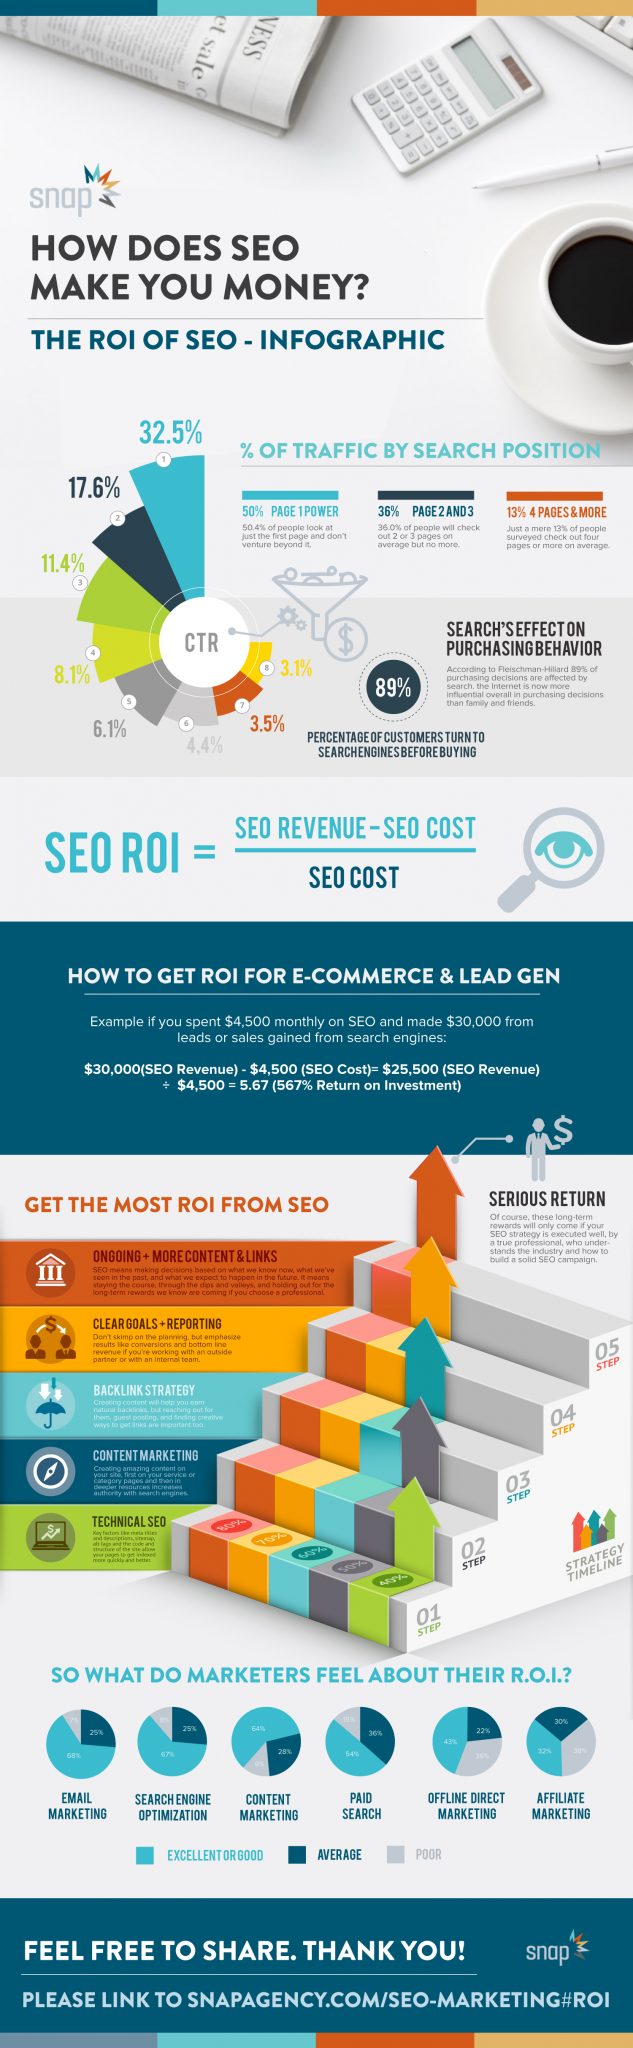 What is the ROI of SEO - How does SEO Make Me Money - ROI of SEO Infographic